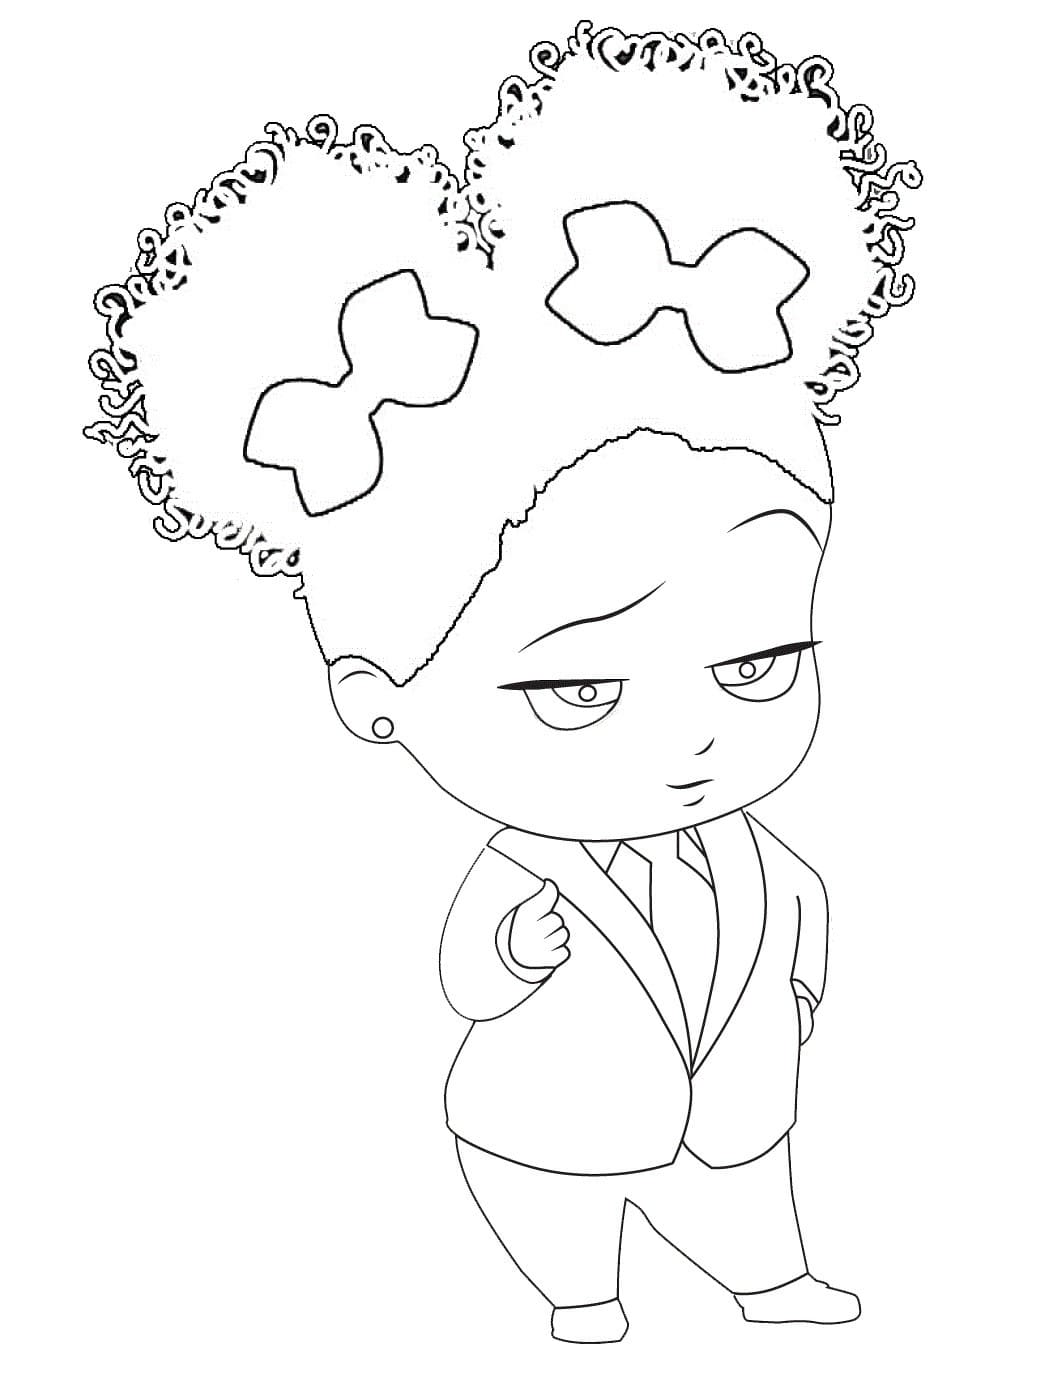 The Boss Baby coloring pages - Print for kids | WONDER DAY — Coloring